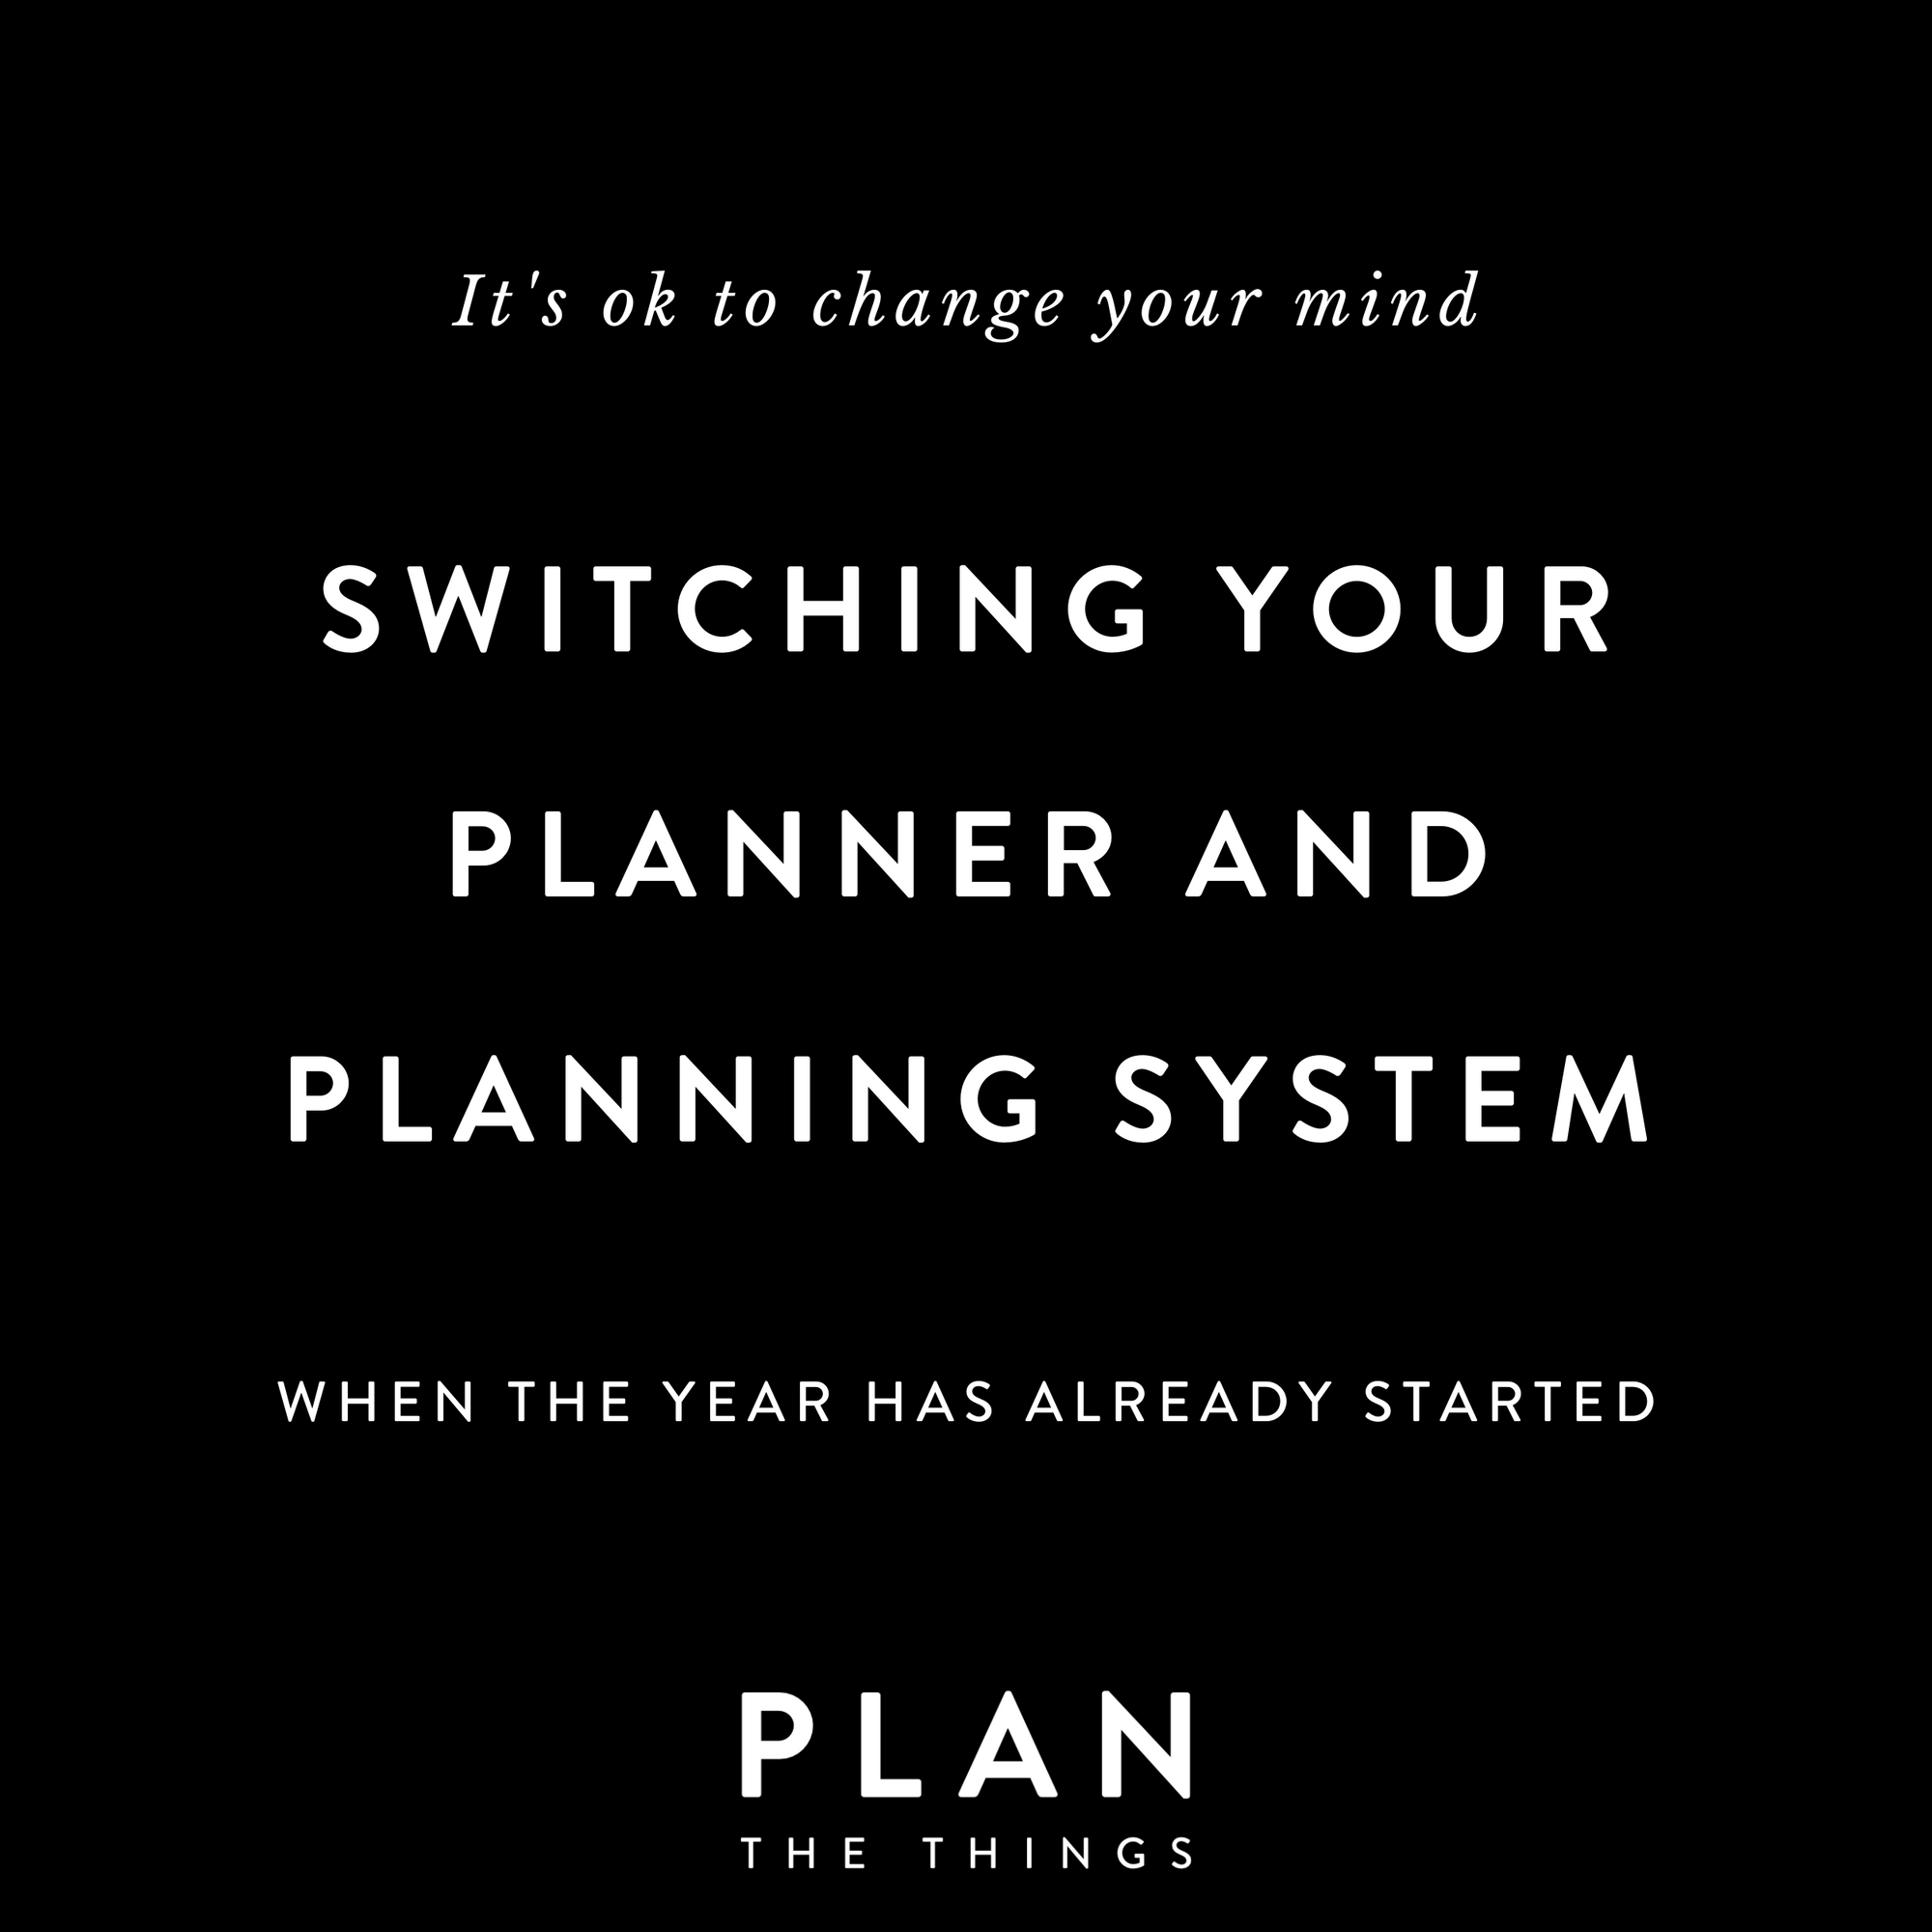 It's ok to change your mind - switching your planner and planning system when the year has already started